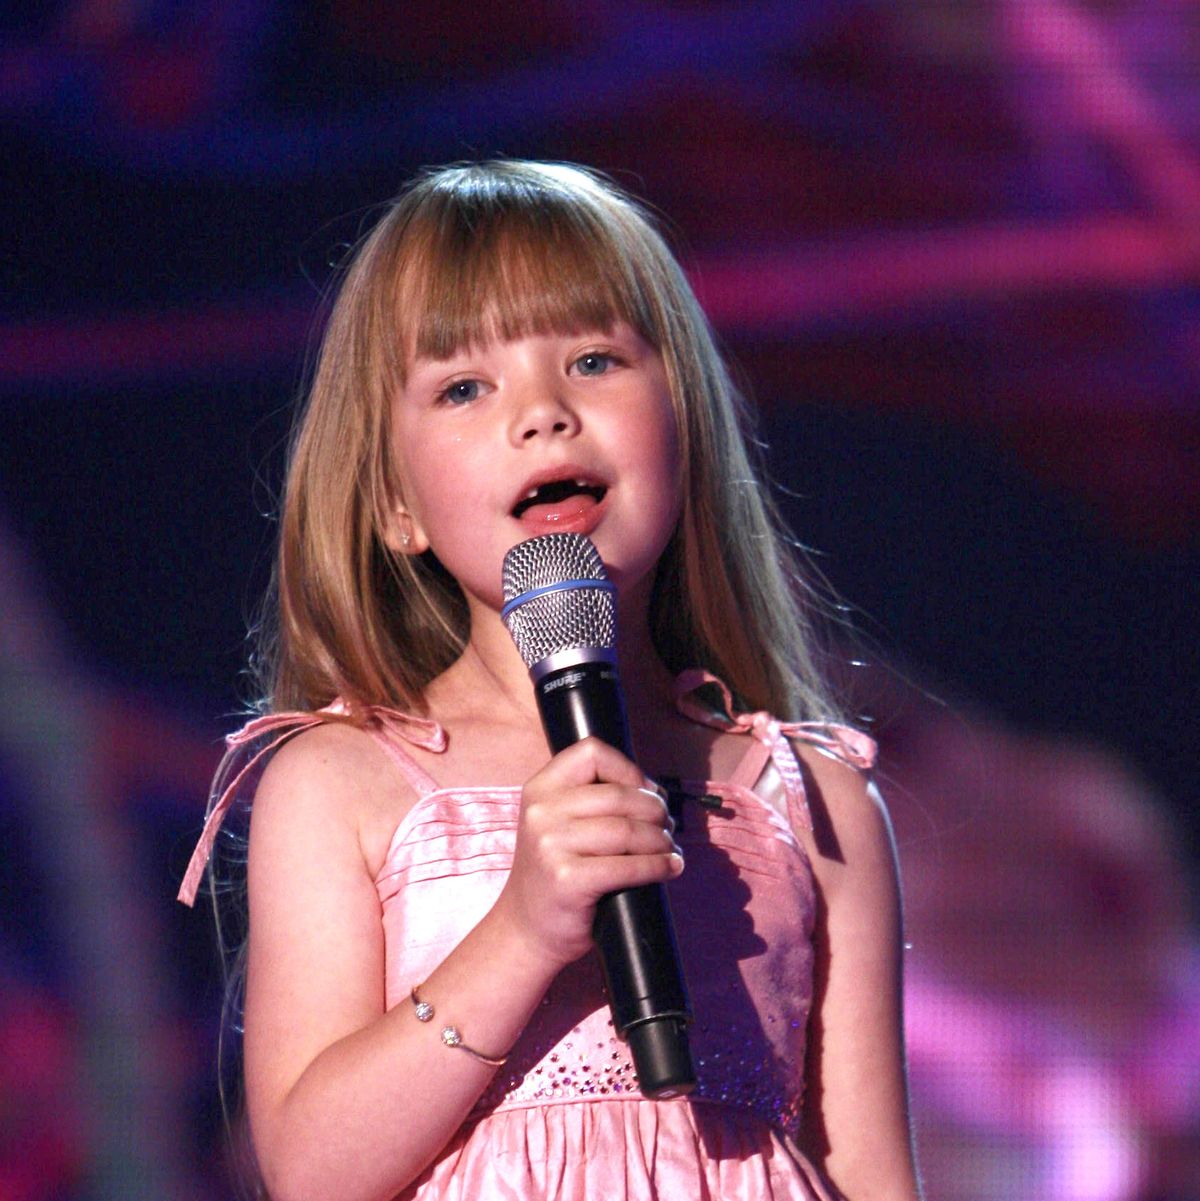 See Britain's Got Talent's Connie Talbot, the eight-year-old singing